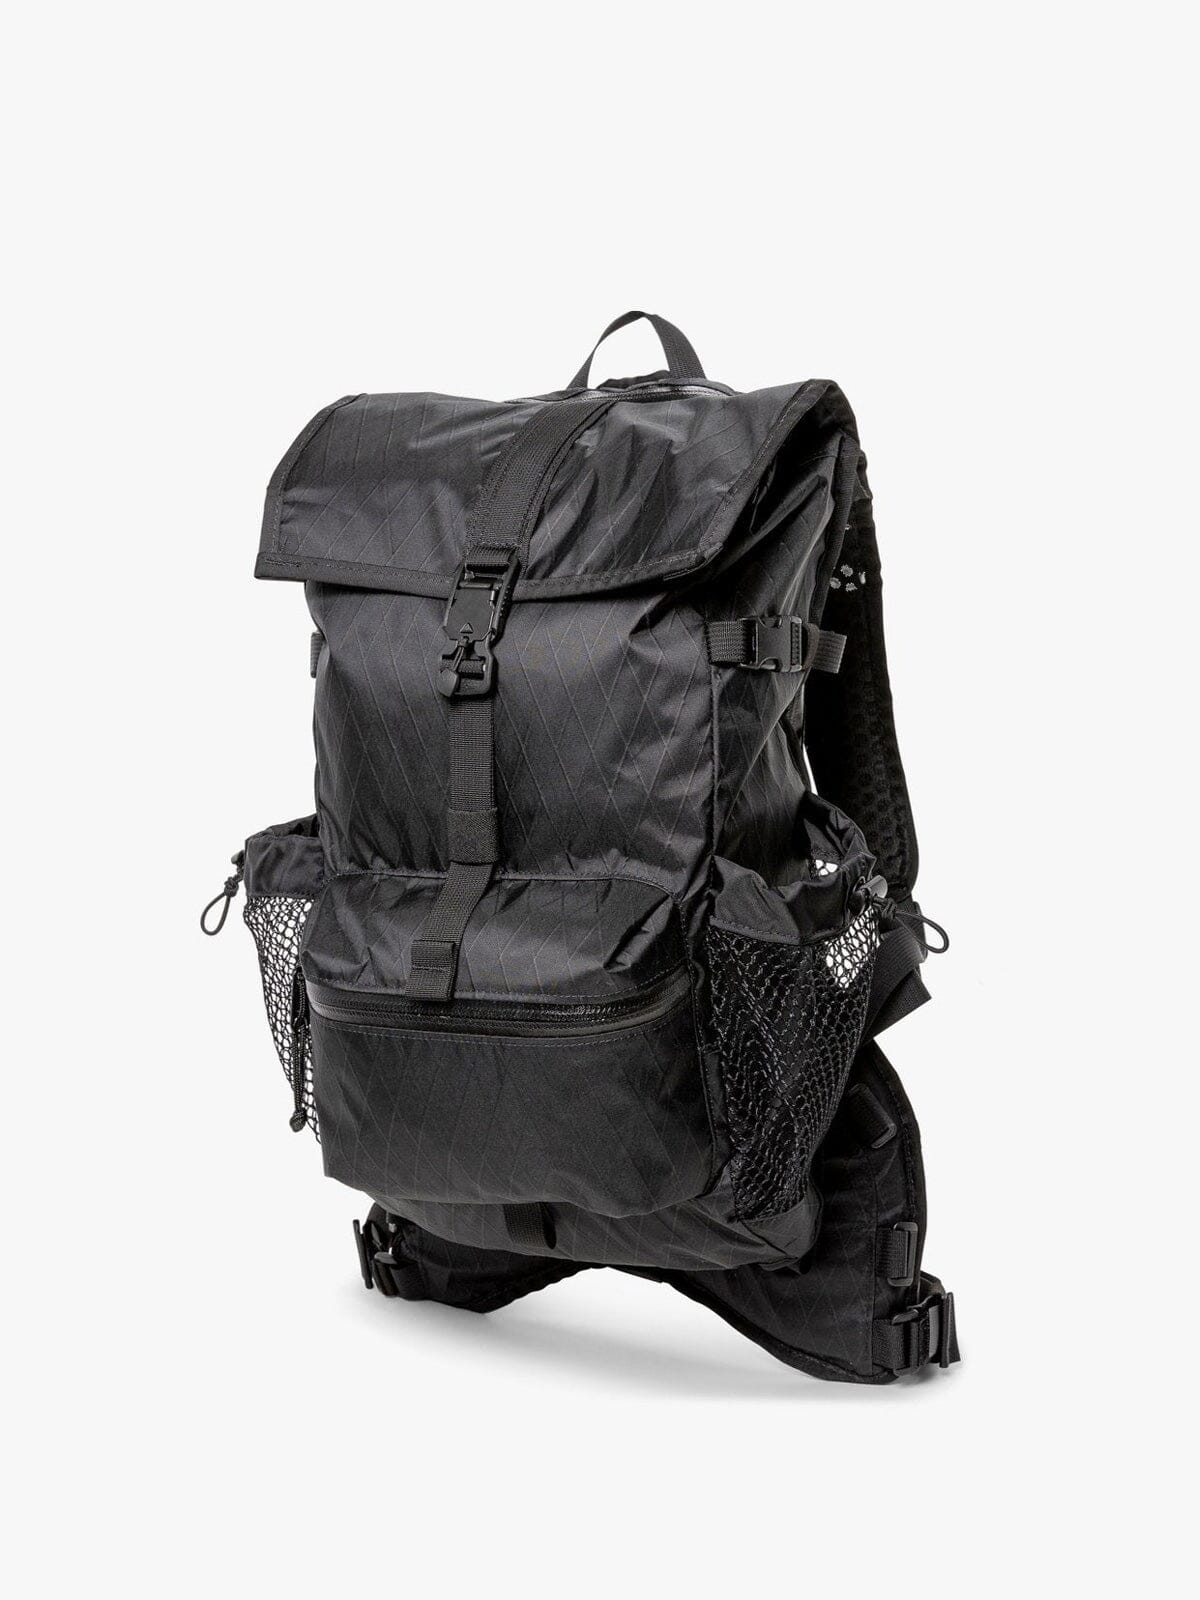 Speedwell by Mission Workshop - Weatherproof Bags & Technical Apparel - San Francisco & Los Angeles - Built to endure - Guaranteed forever